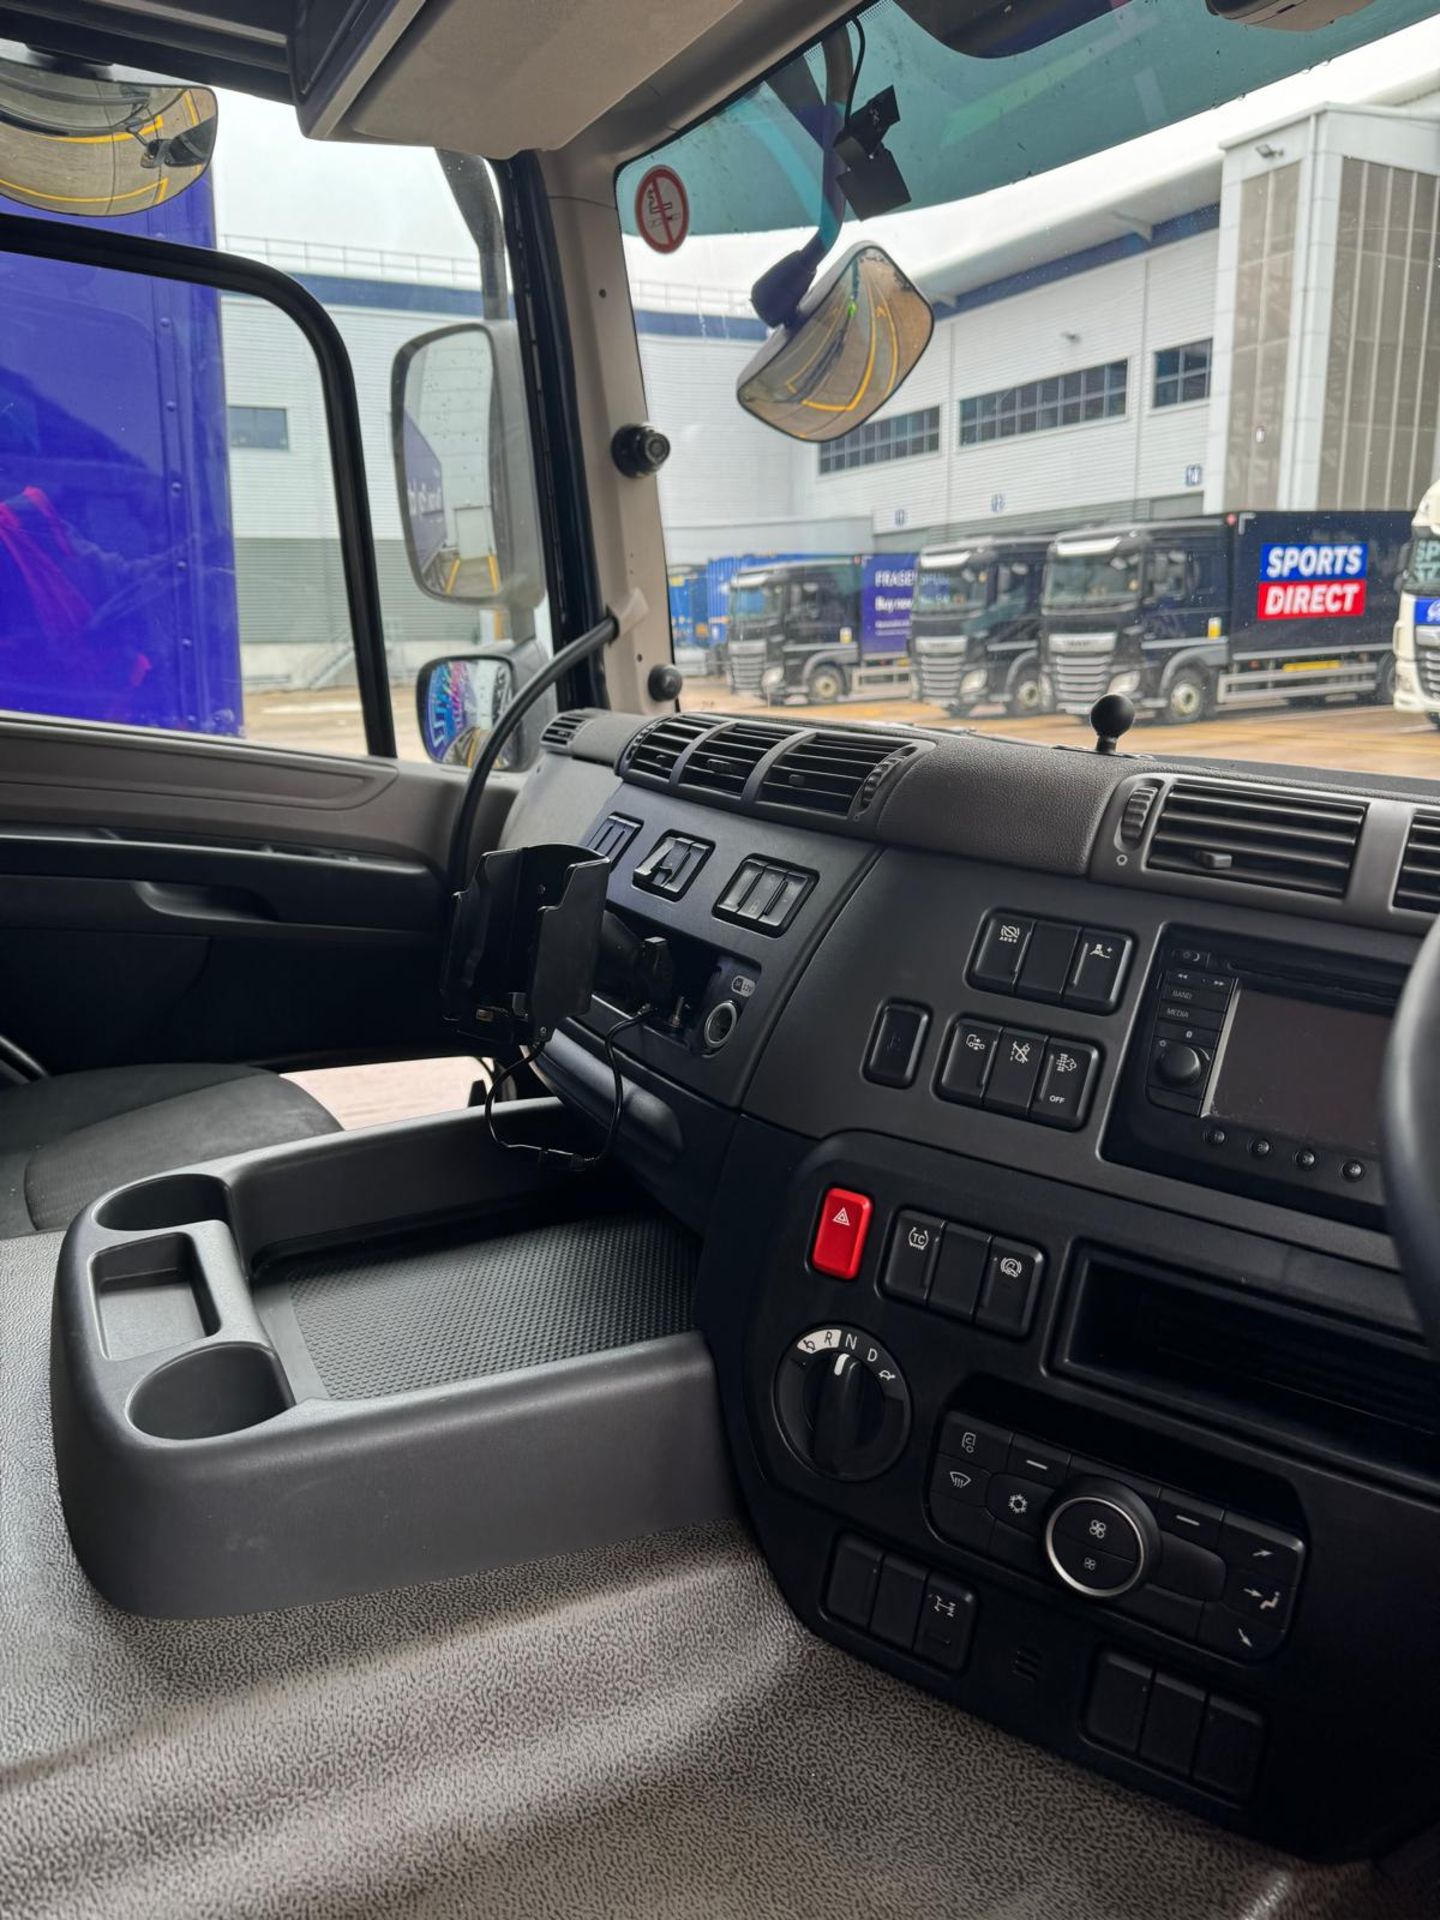 2019, DAF CF 260 FA (Ex-Fleet Owned & Maintained) - FN69 AXH (18 Ton Rigid Truck with Tail Lift) - Image 10 of 14